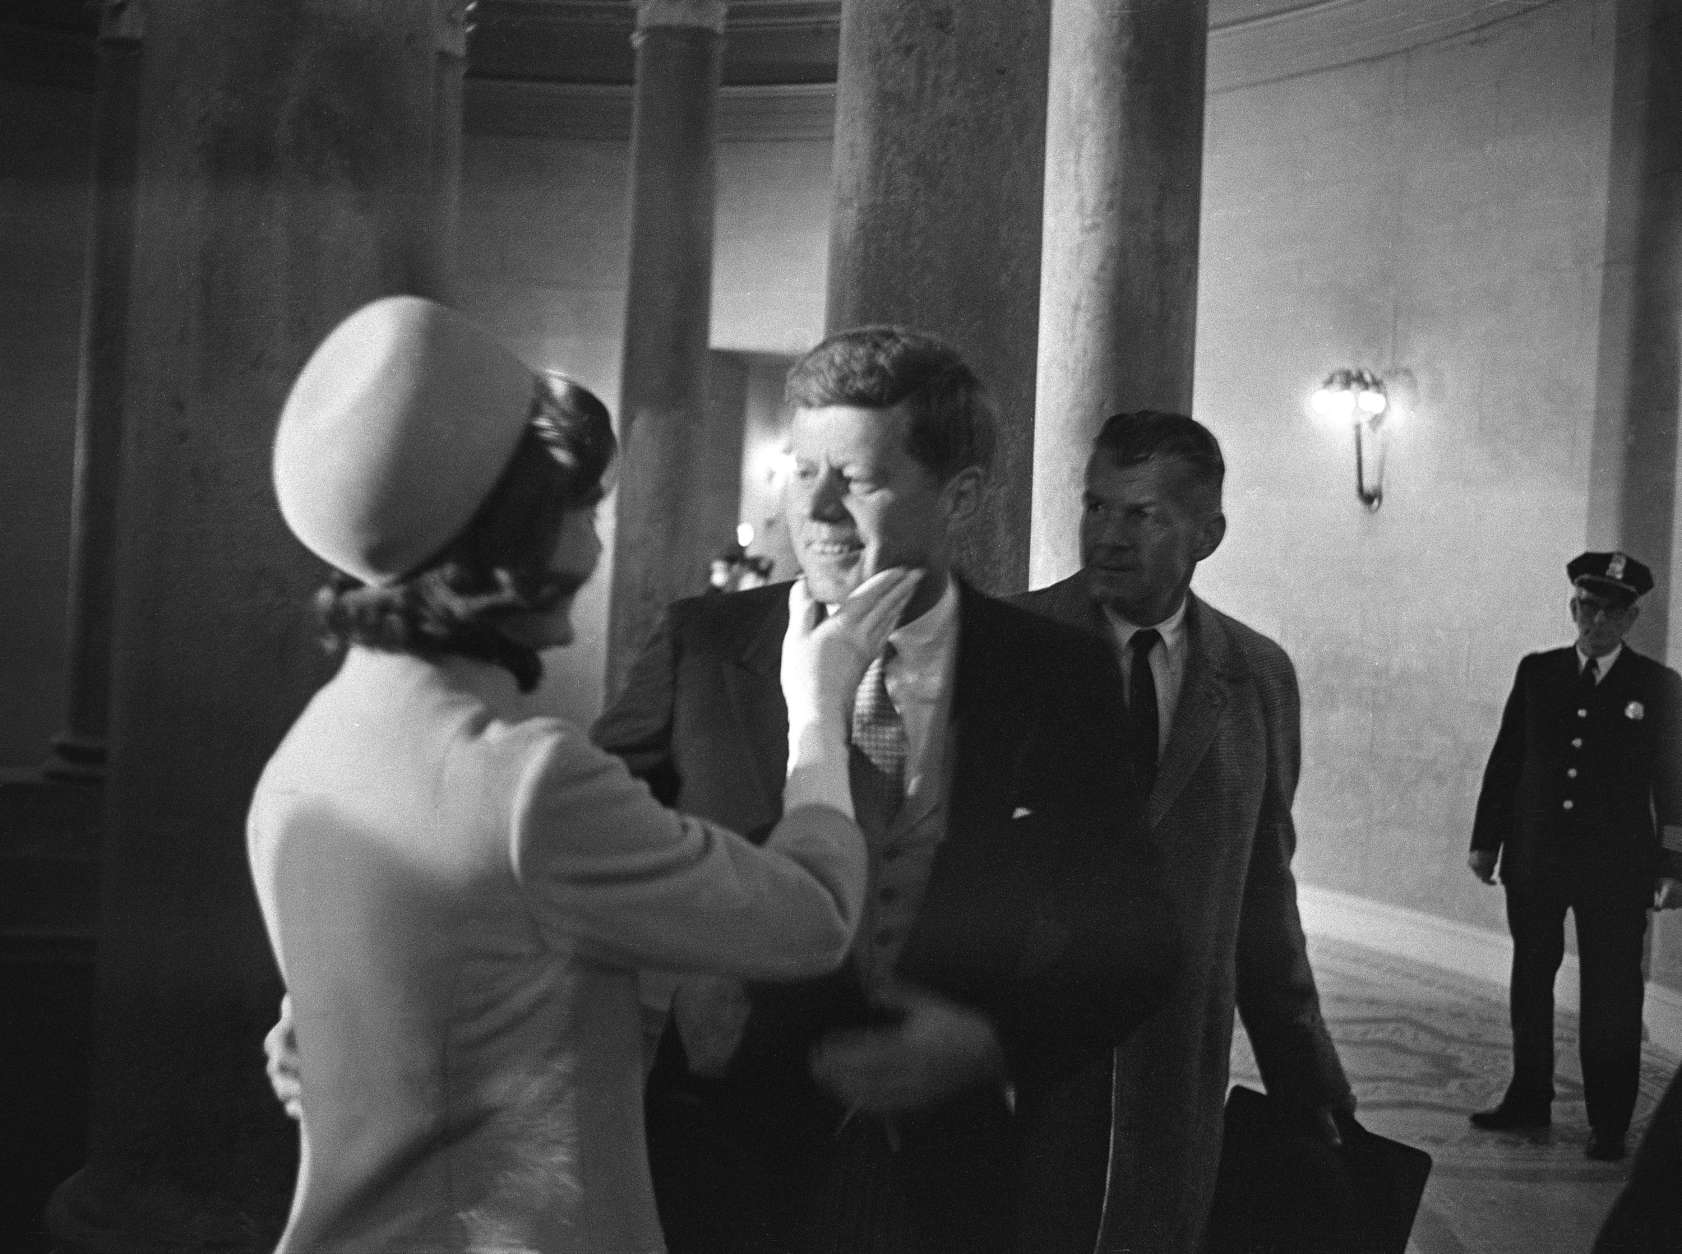 Mrs. Jacqueline Kennedy has a chuck under the chin for her husband moments after he became president, January 20, 1961. This exclusive picture by AP photographer Henry Burroughs was taken in the rotunda of the Capitol just after President John F. Kennedy left the inaugural stand.  (AP Photo/Henry Burroughs)